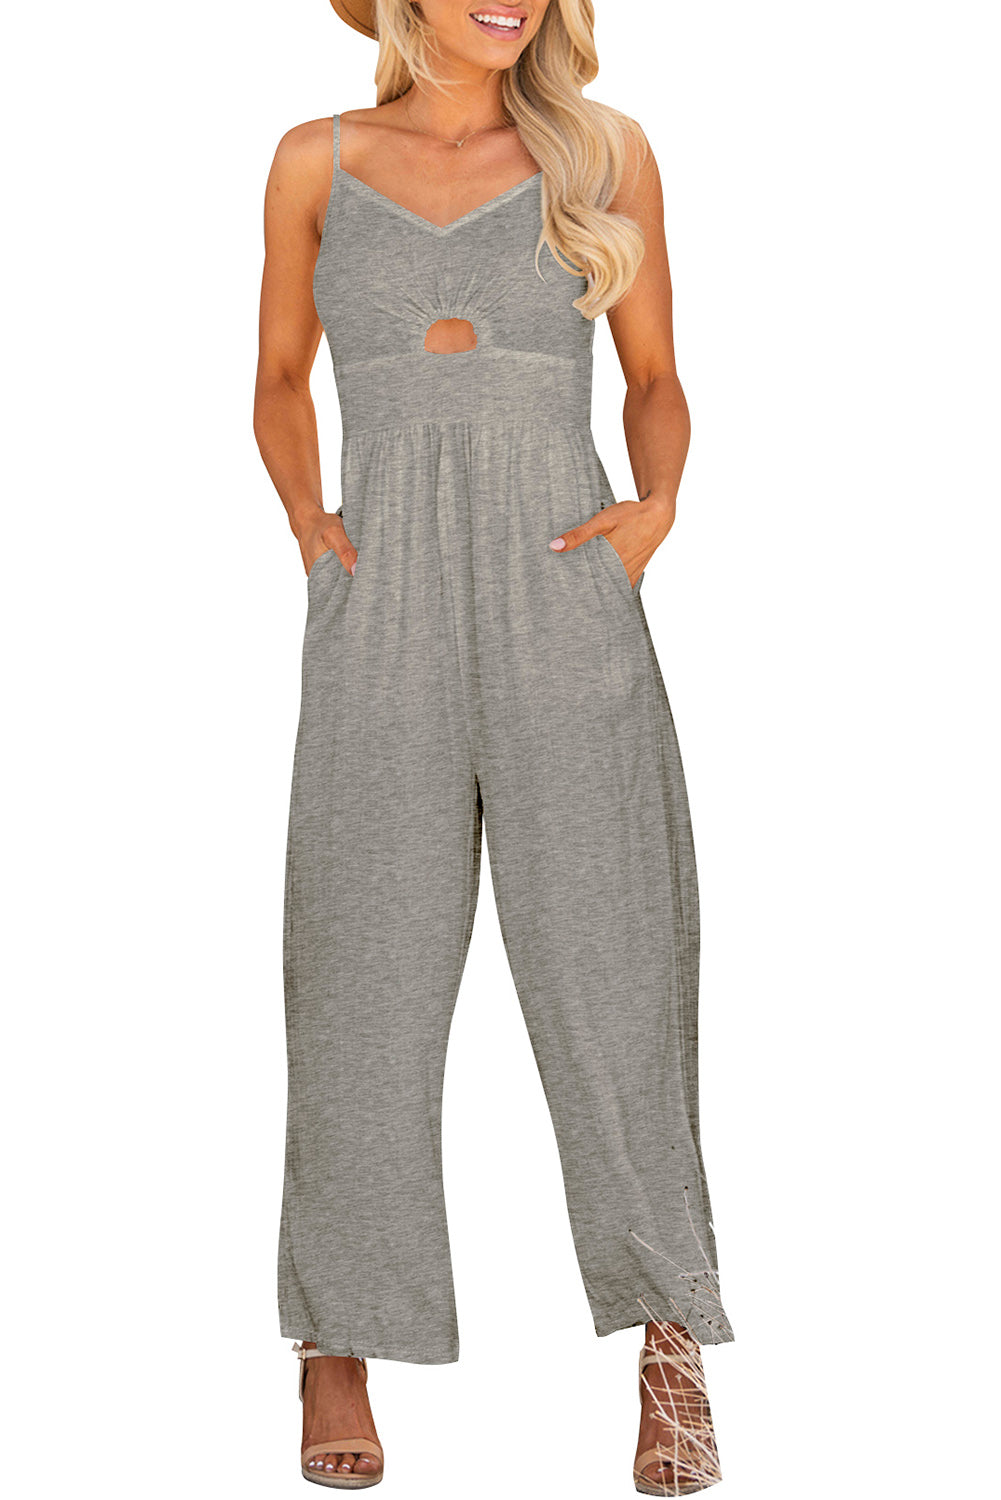 Smocked Spaghetti Strap Wide Leg Jumpsuit-SHIPS DIRECTLY TO YOU!